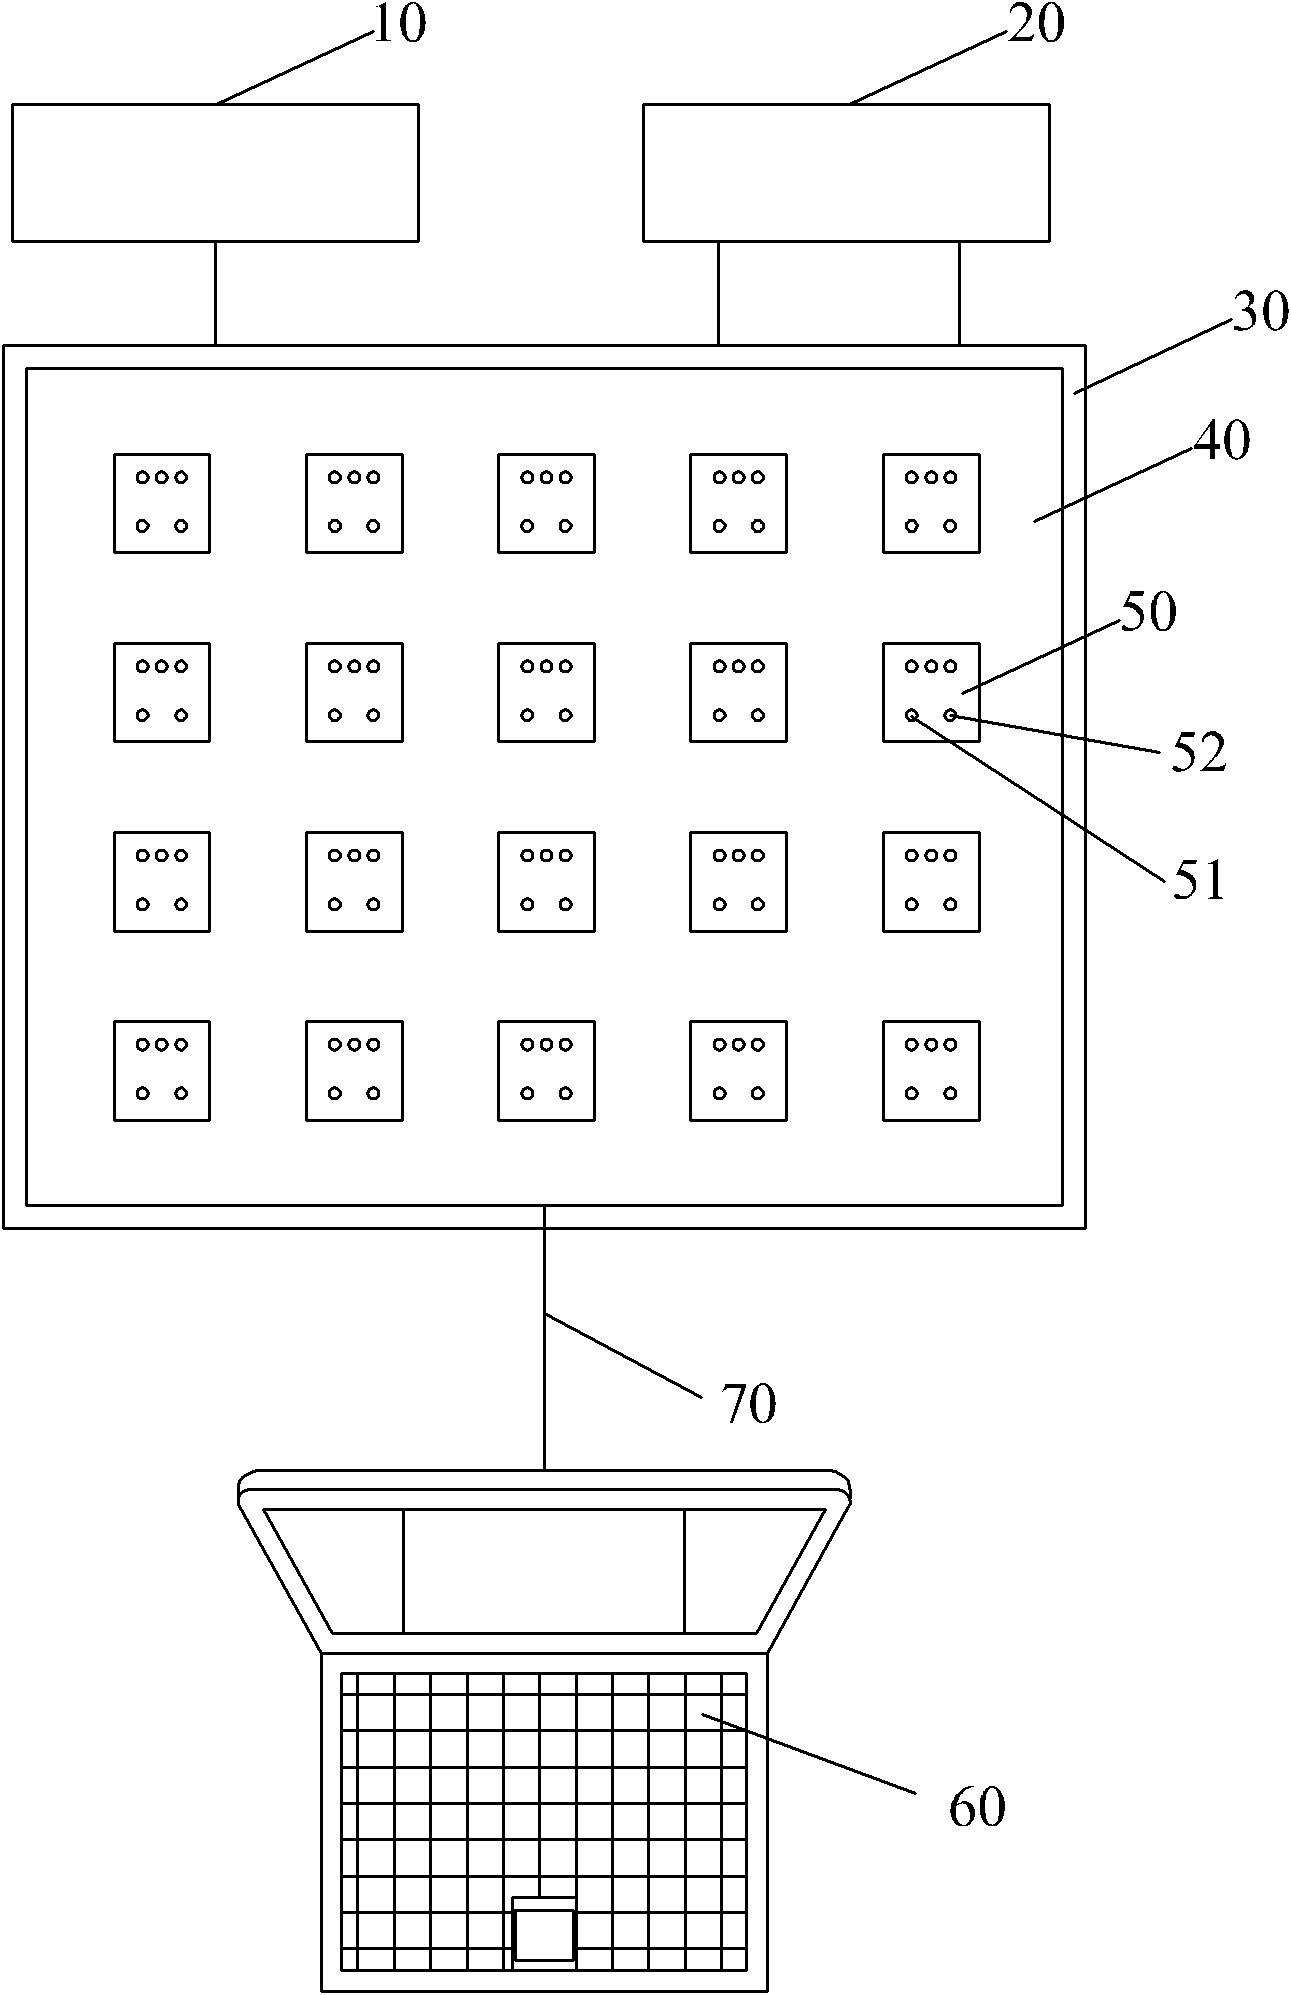 High-frequency and high-speed frequency testing system and method based on phase locking technique